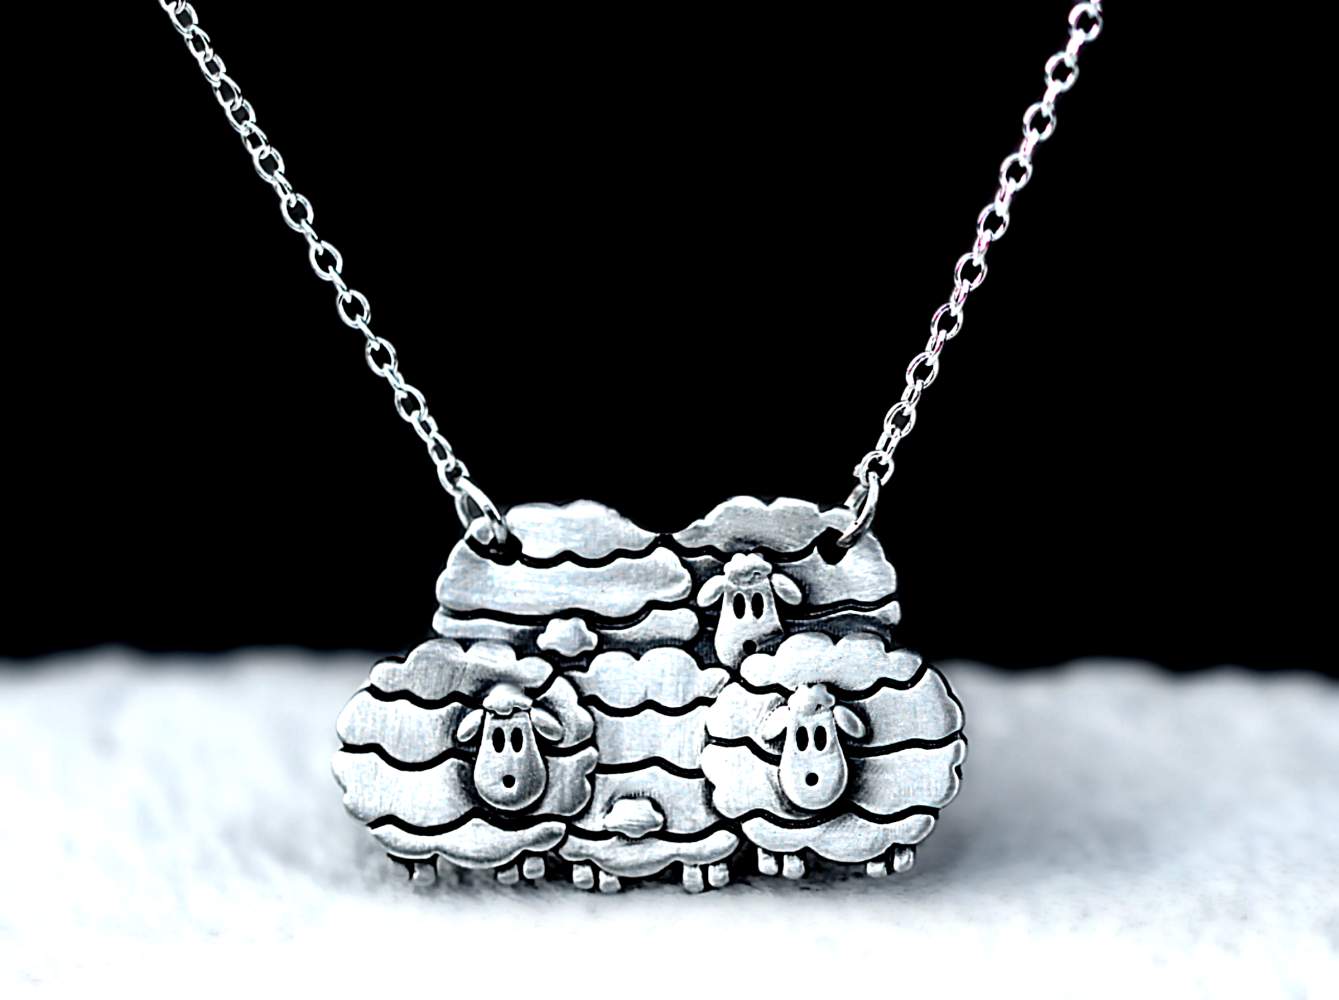 Cute flock of sheep necklace. 925 Sterling Silver